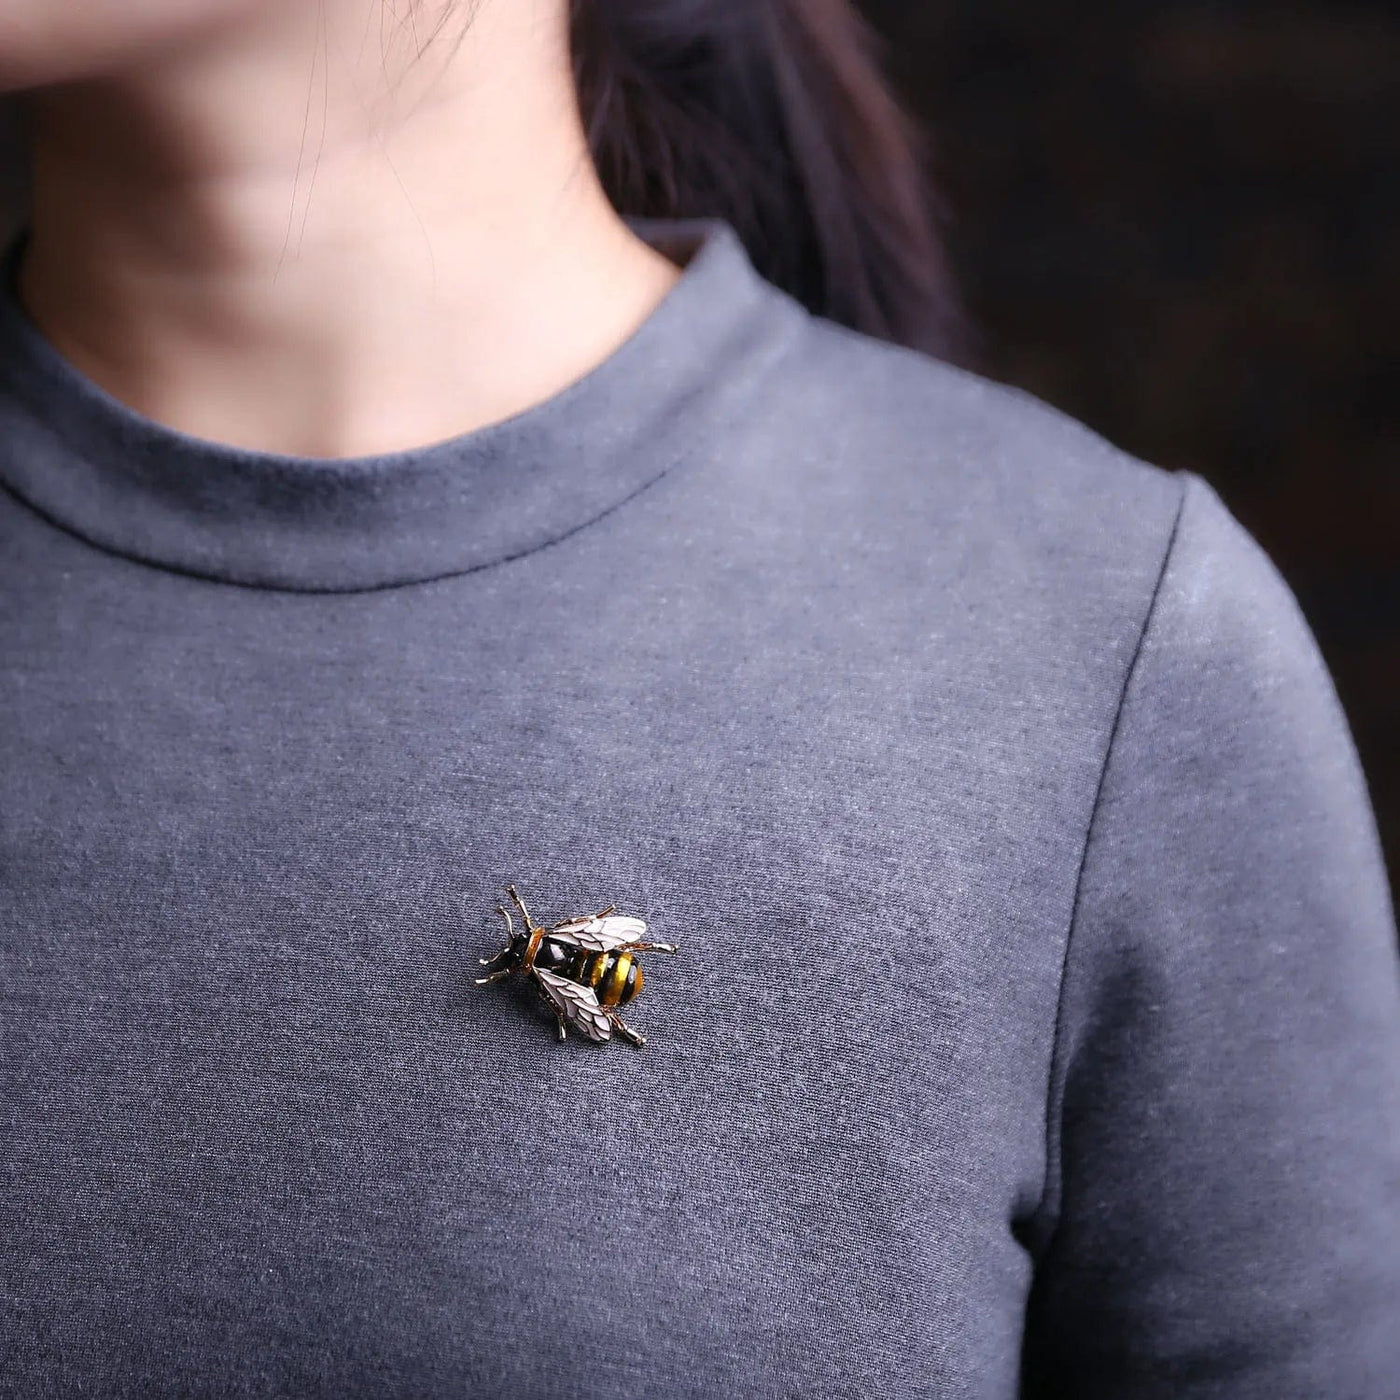 BROOCHITON Brooches a woman wearing a Yellow alloy oil honey bee brooch pin on a grey sweater